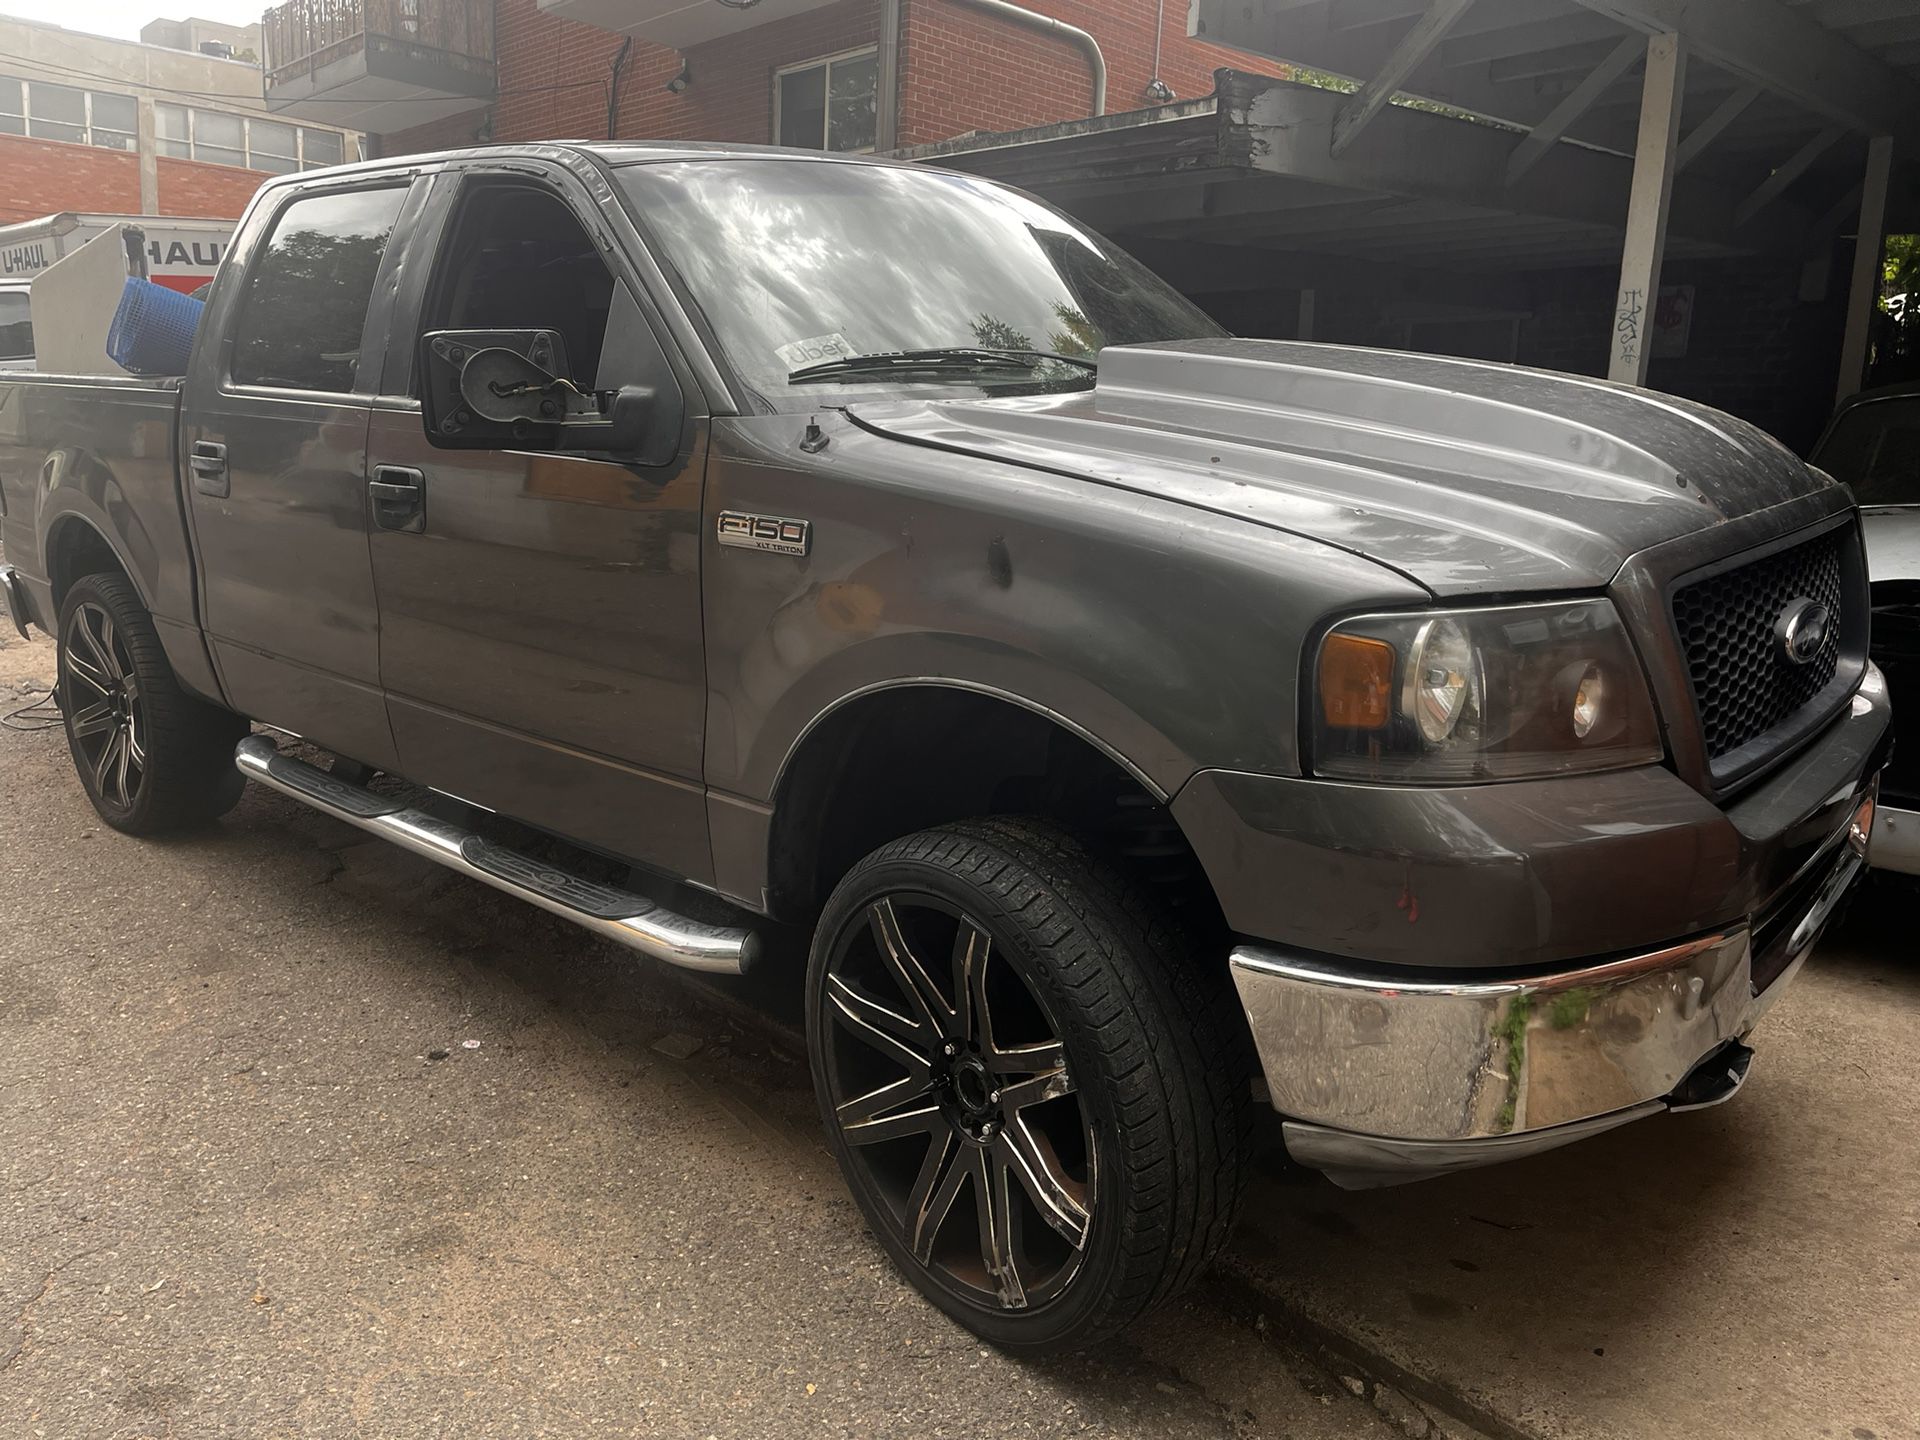 Ford F150 XLT Triton Truck For Sale Parts